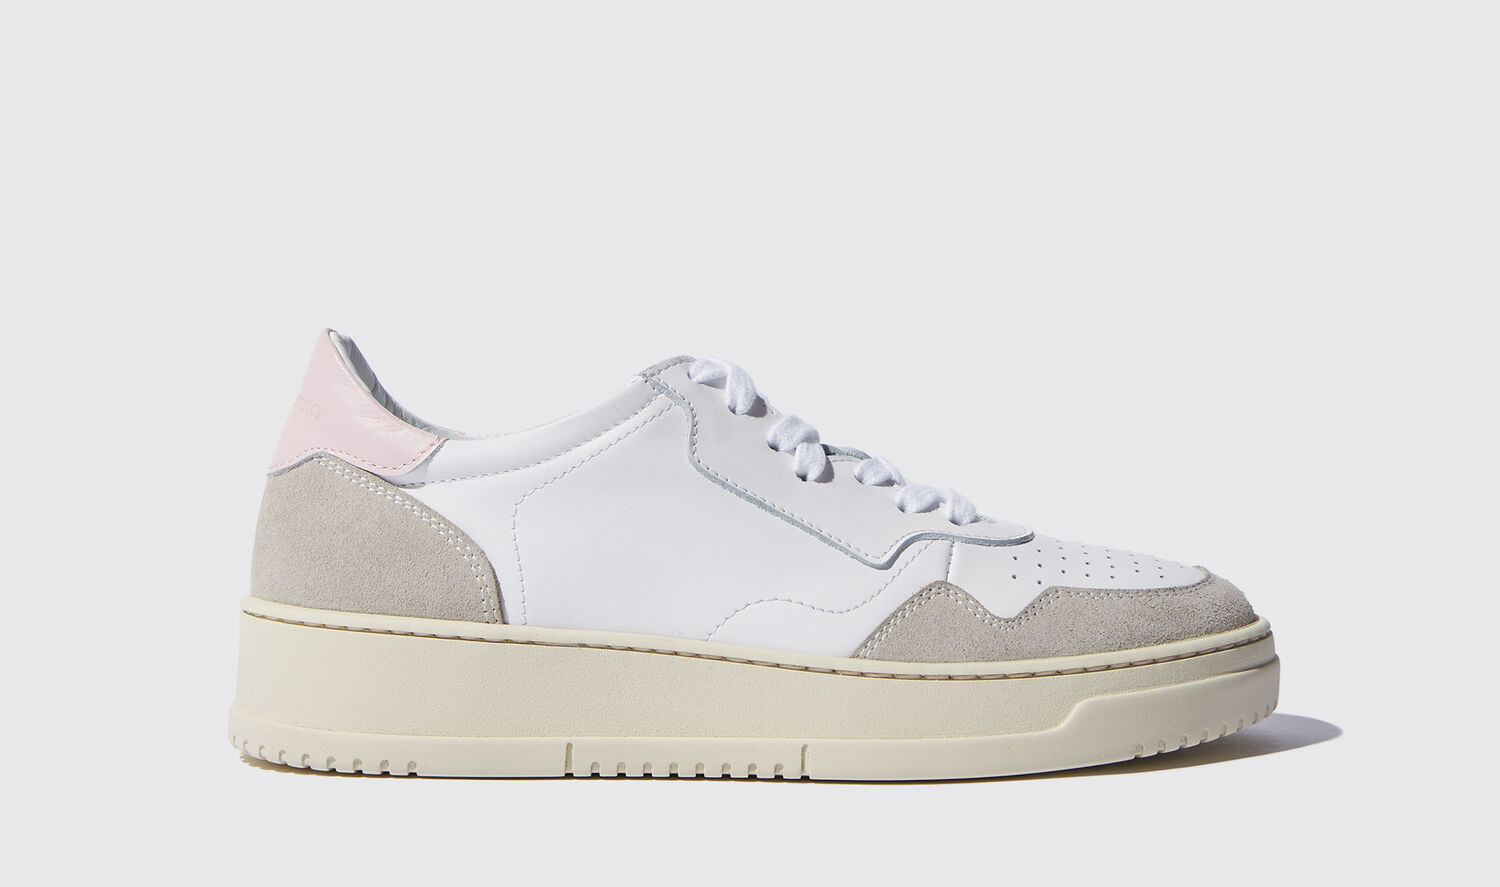 Scarosso Sneakers Alexia Pink Edit Calf Leather In White/pink - Calf